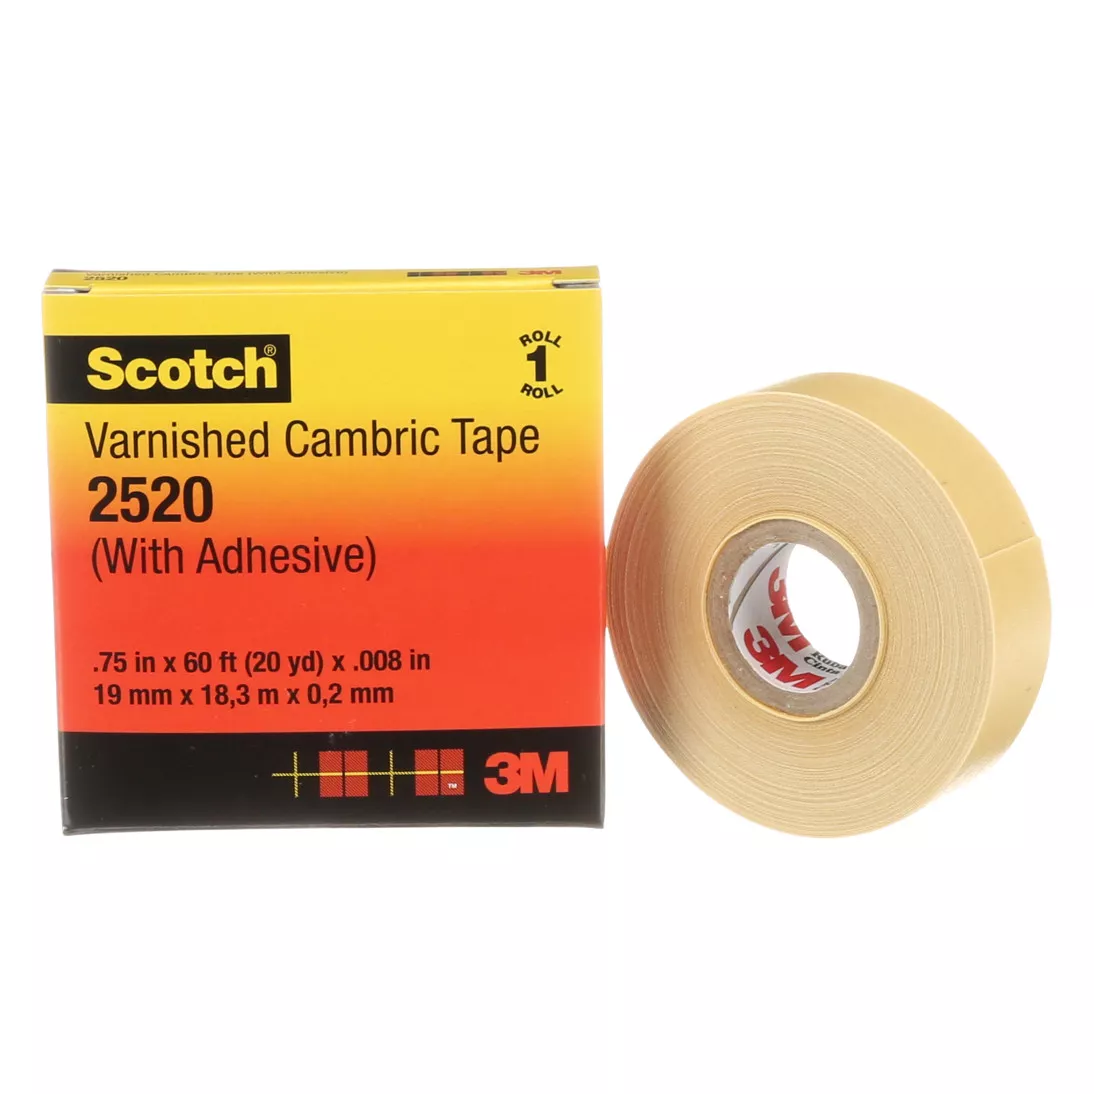 Scotch® Varnished Cambric Tape 2520, 3/4 in x 60 ft, Yellow, 1
roll/carton, 20 rolls/Case